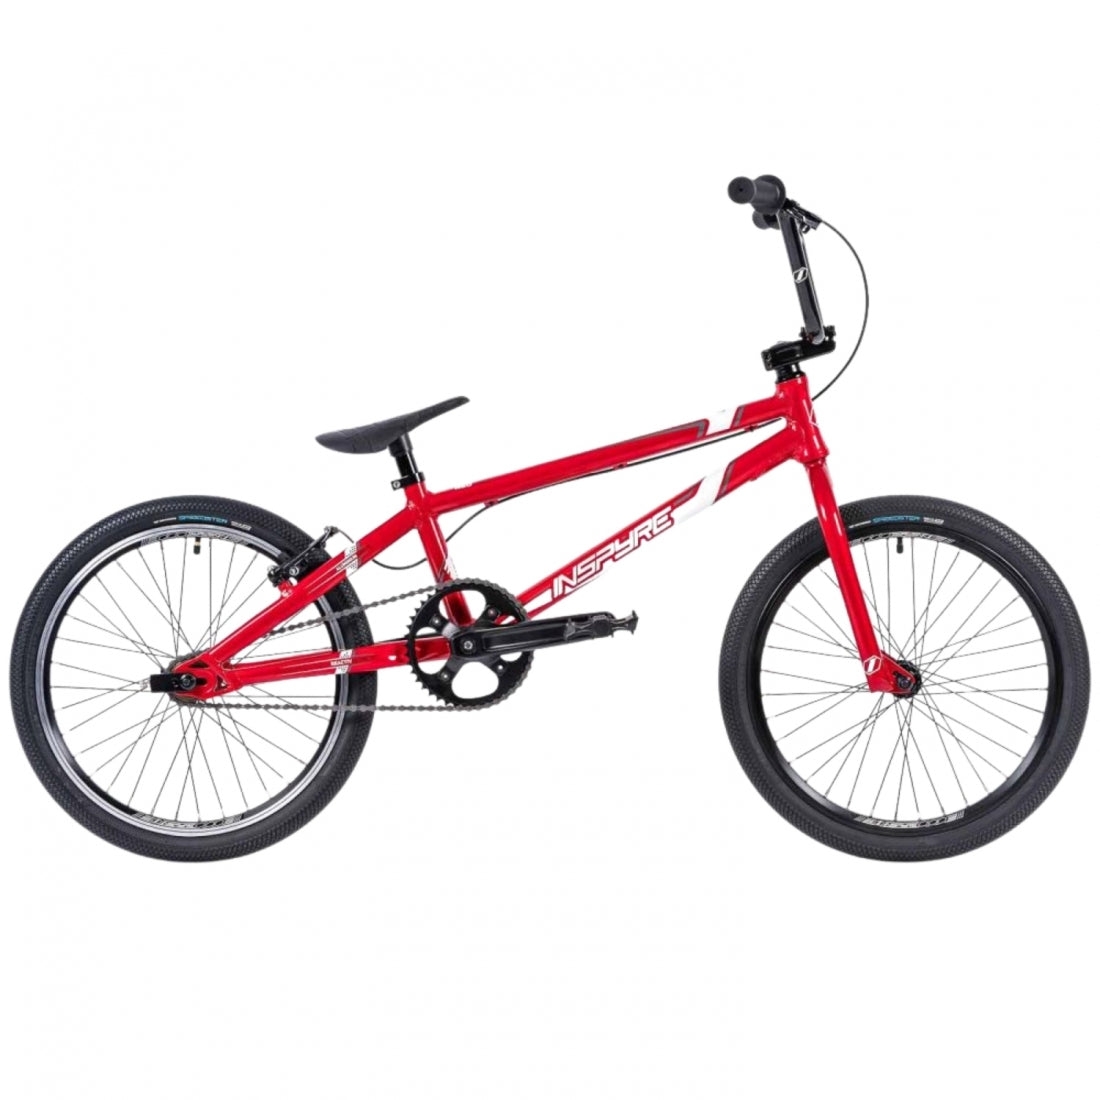 Red Inspyre Neo Pro entry level BMX race bike against a white background.